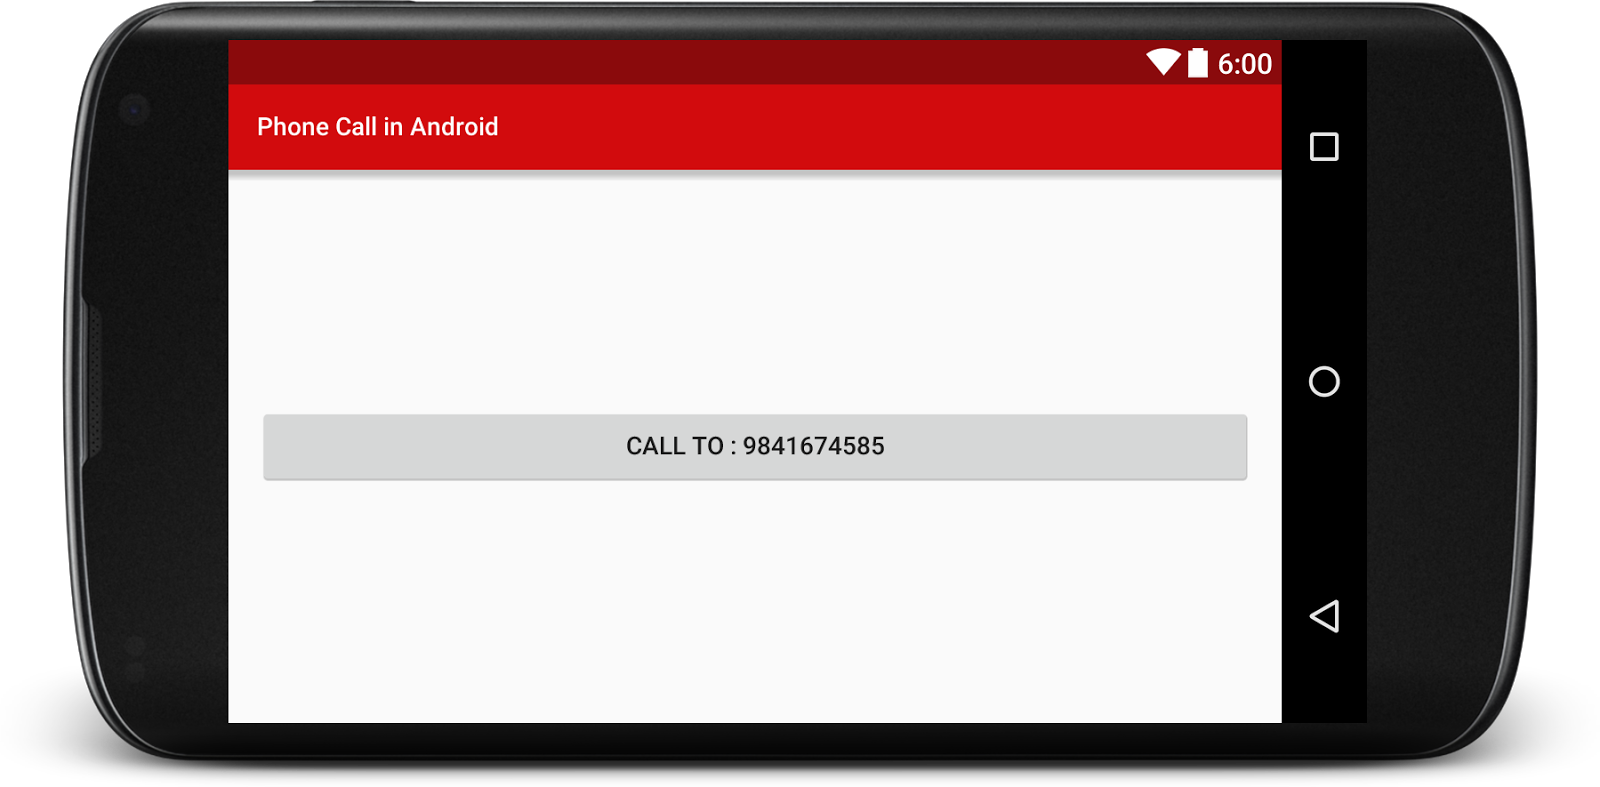 How to Make a Phone Call in Android